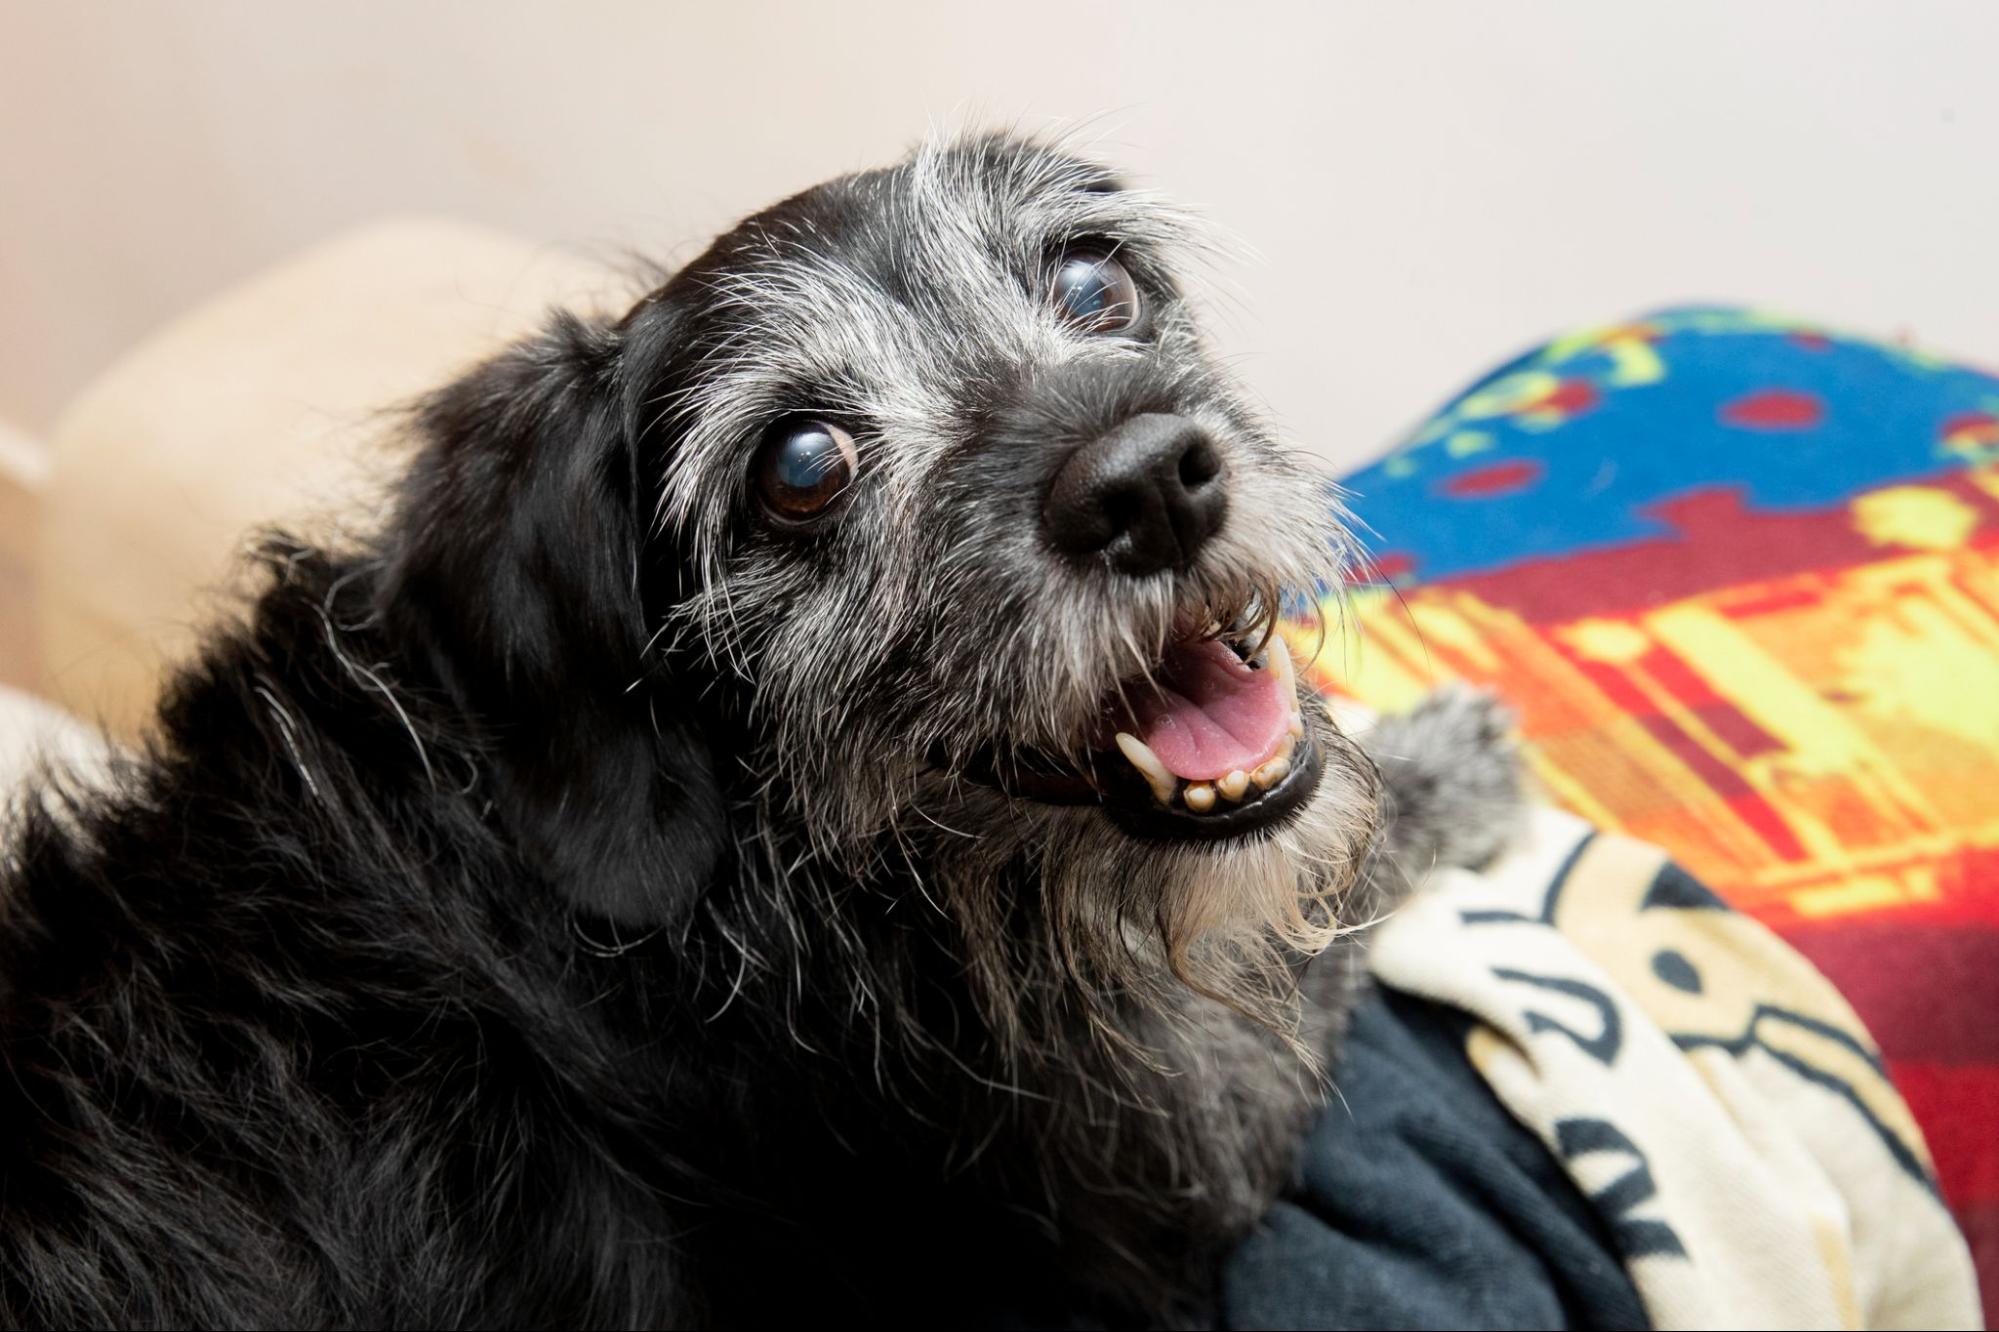 A black older dog with grey hair smiles